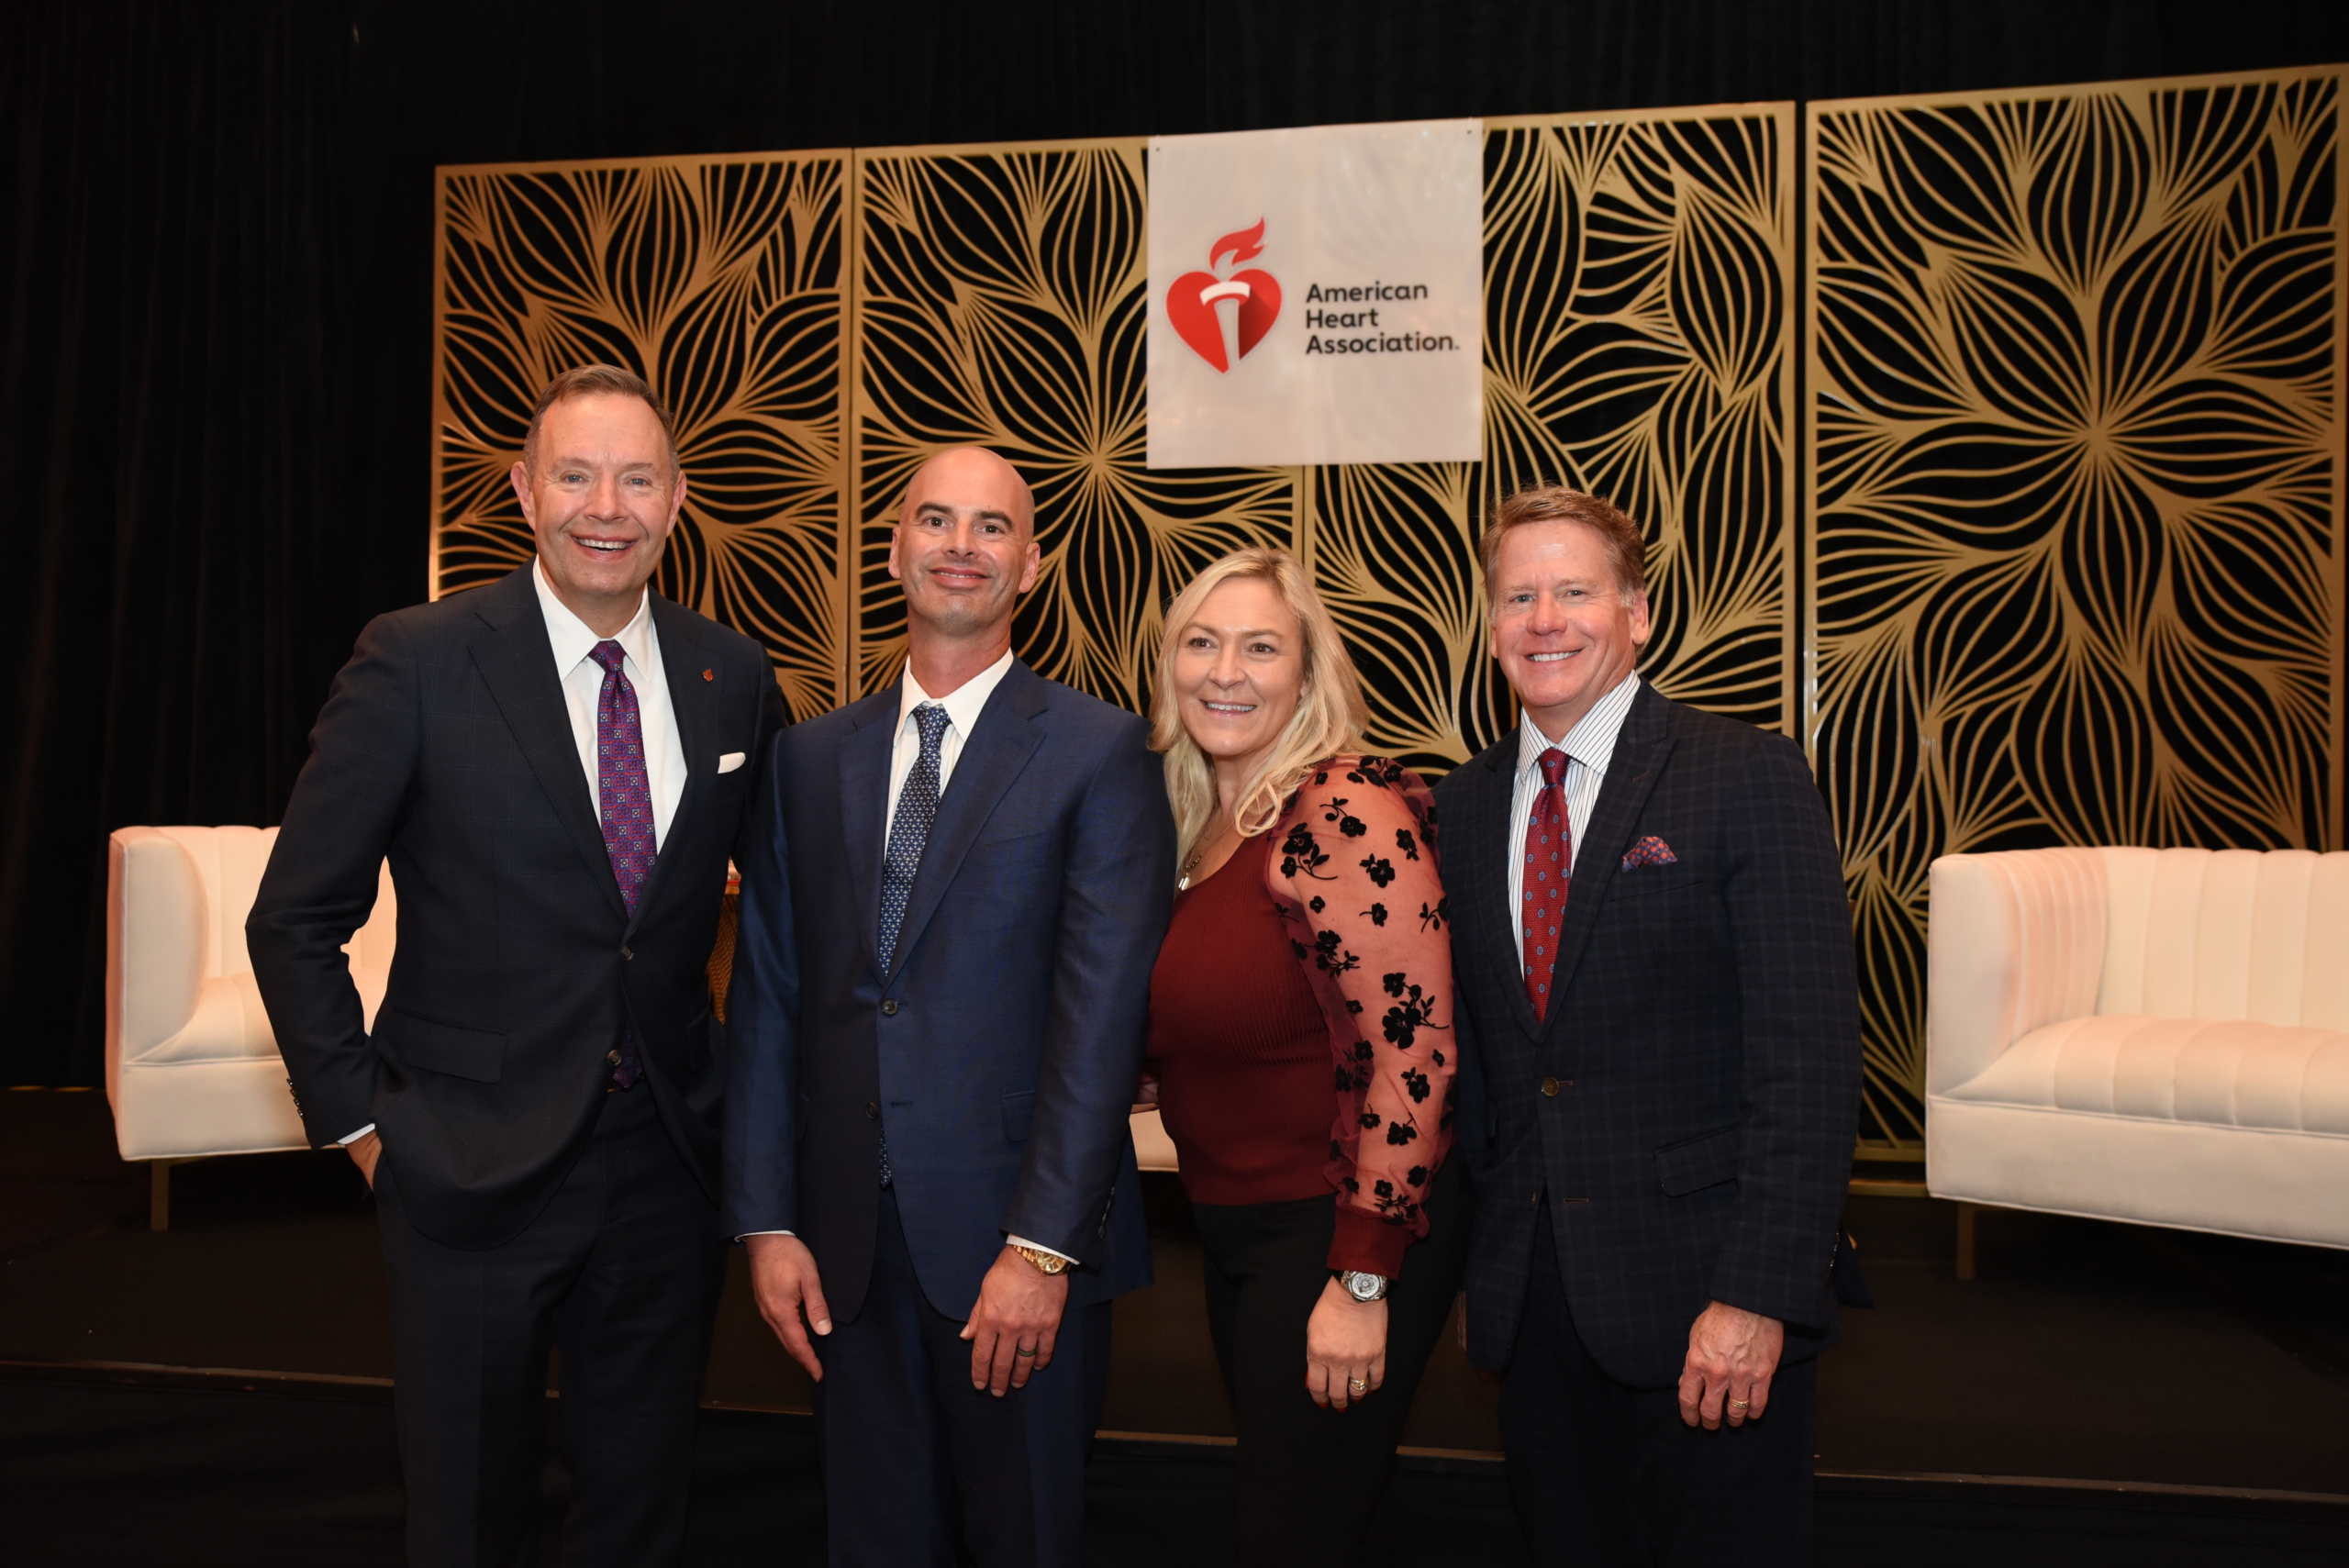 American Heart Association Features Partnership with Helmsley as Part of Centennial Celebration